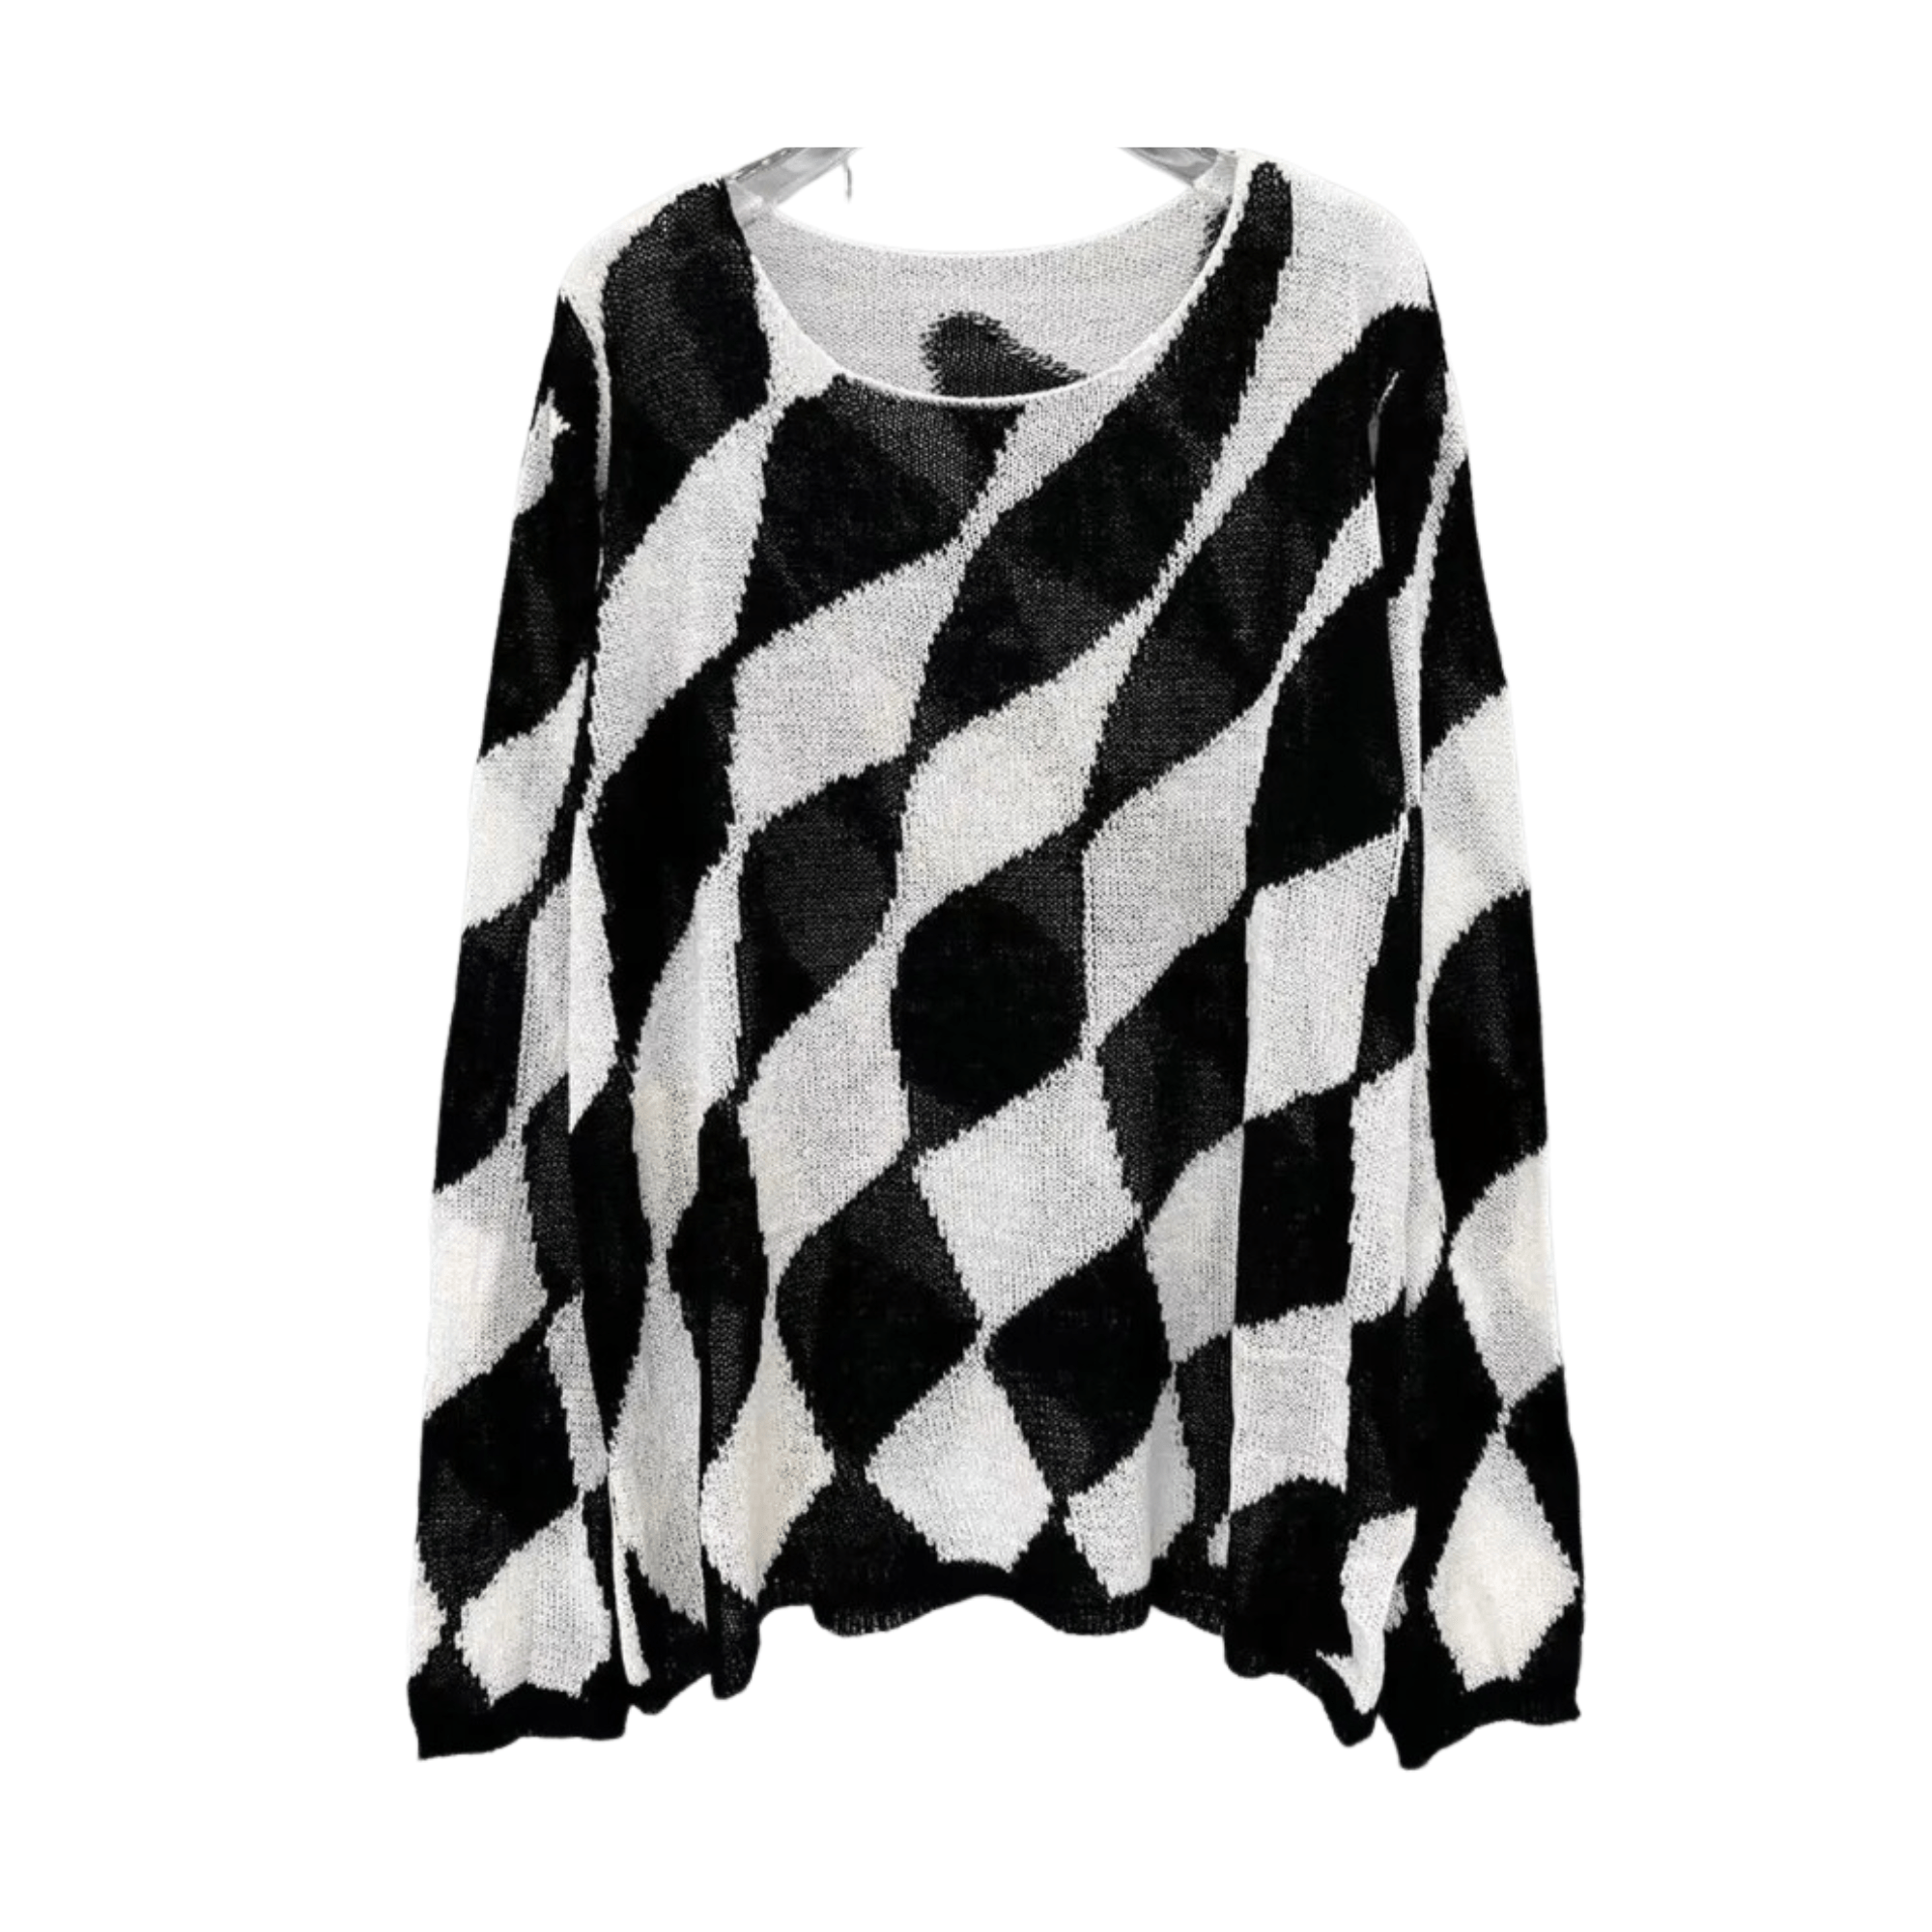 Black and White Contrast Knit Sweater - Kelly Obi New York